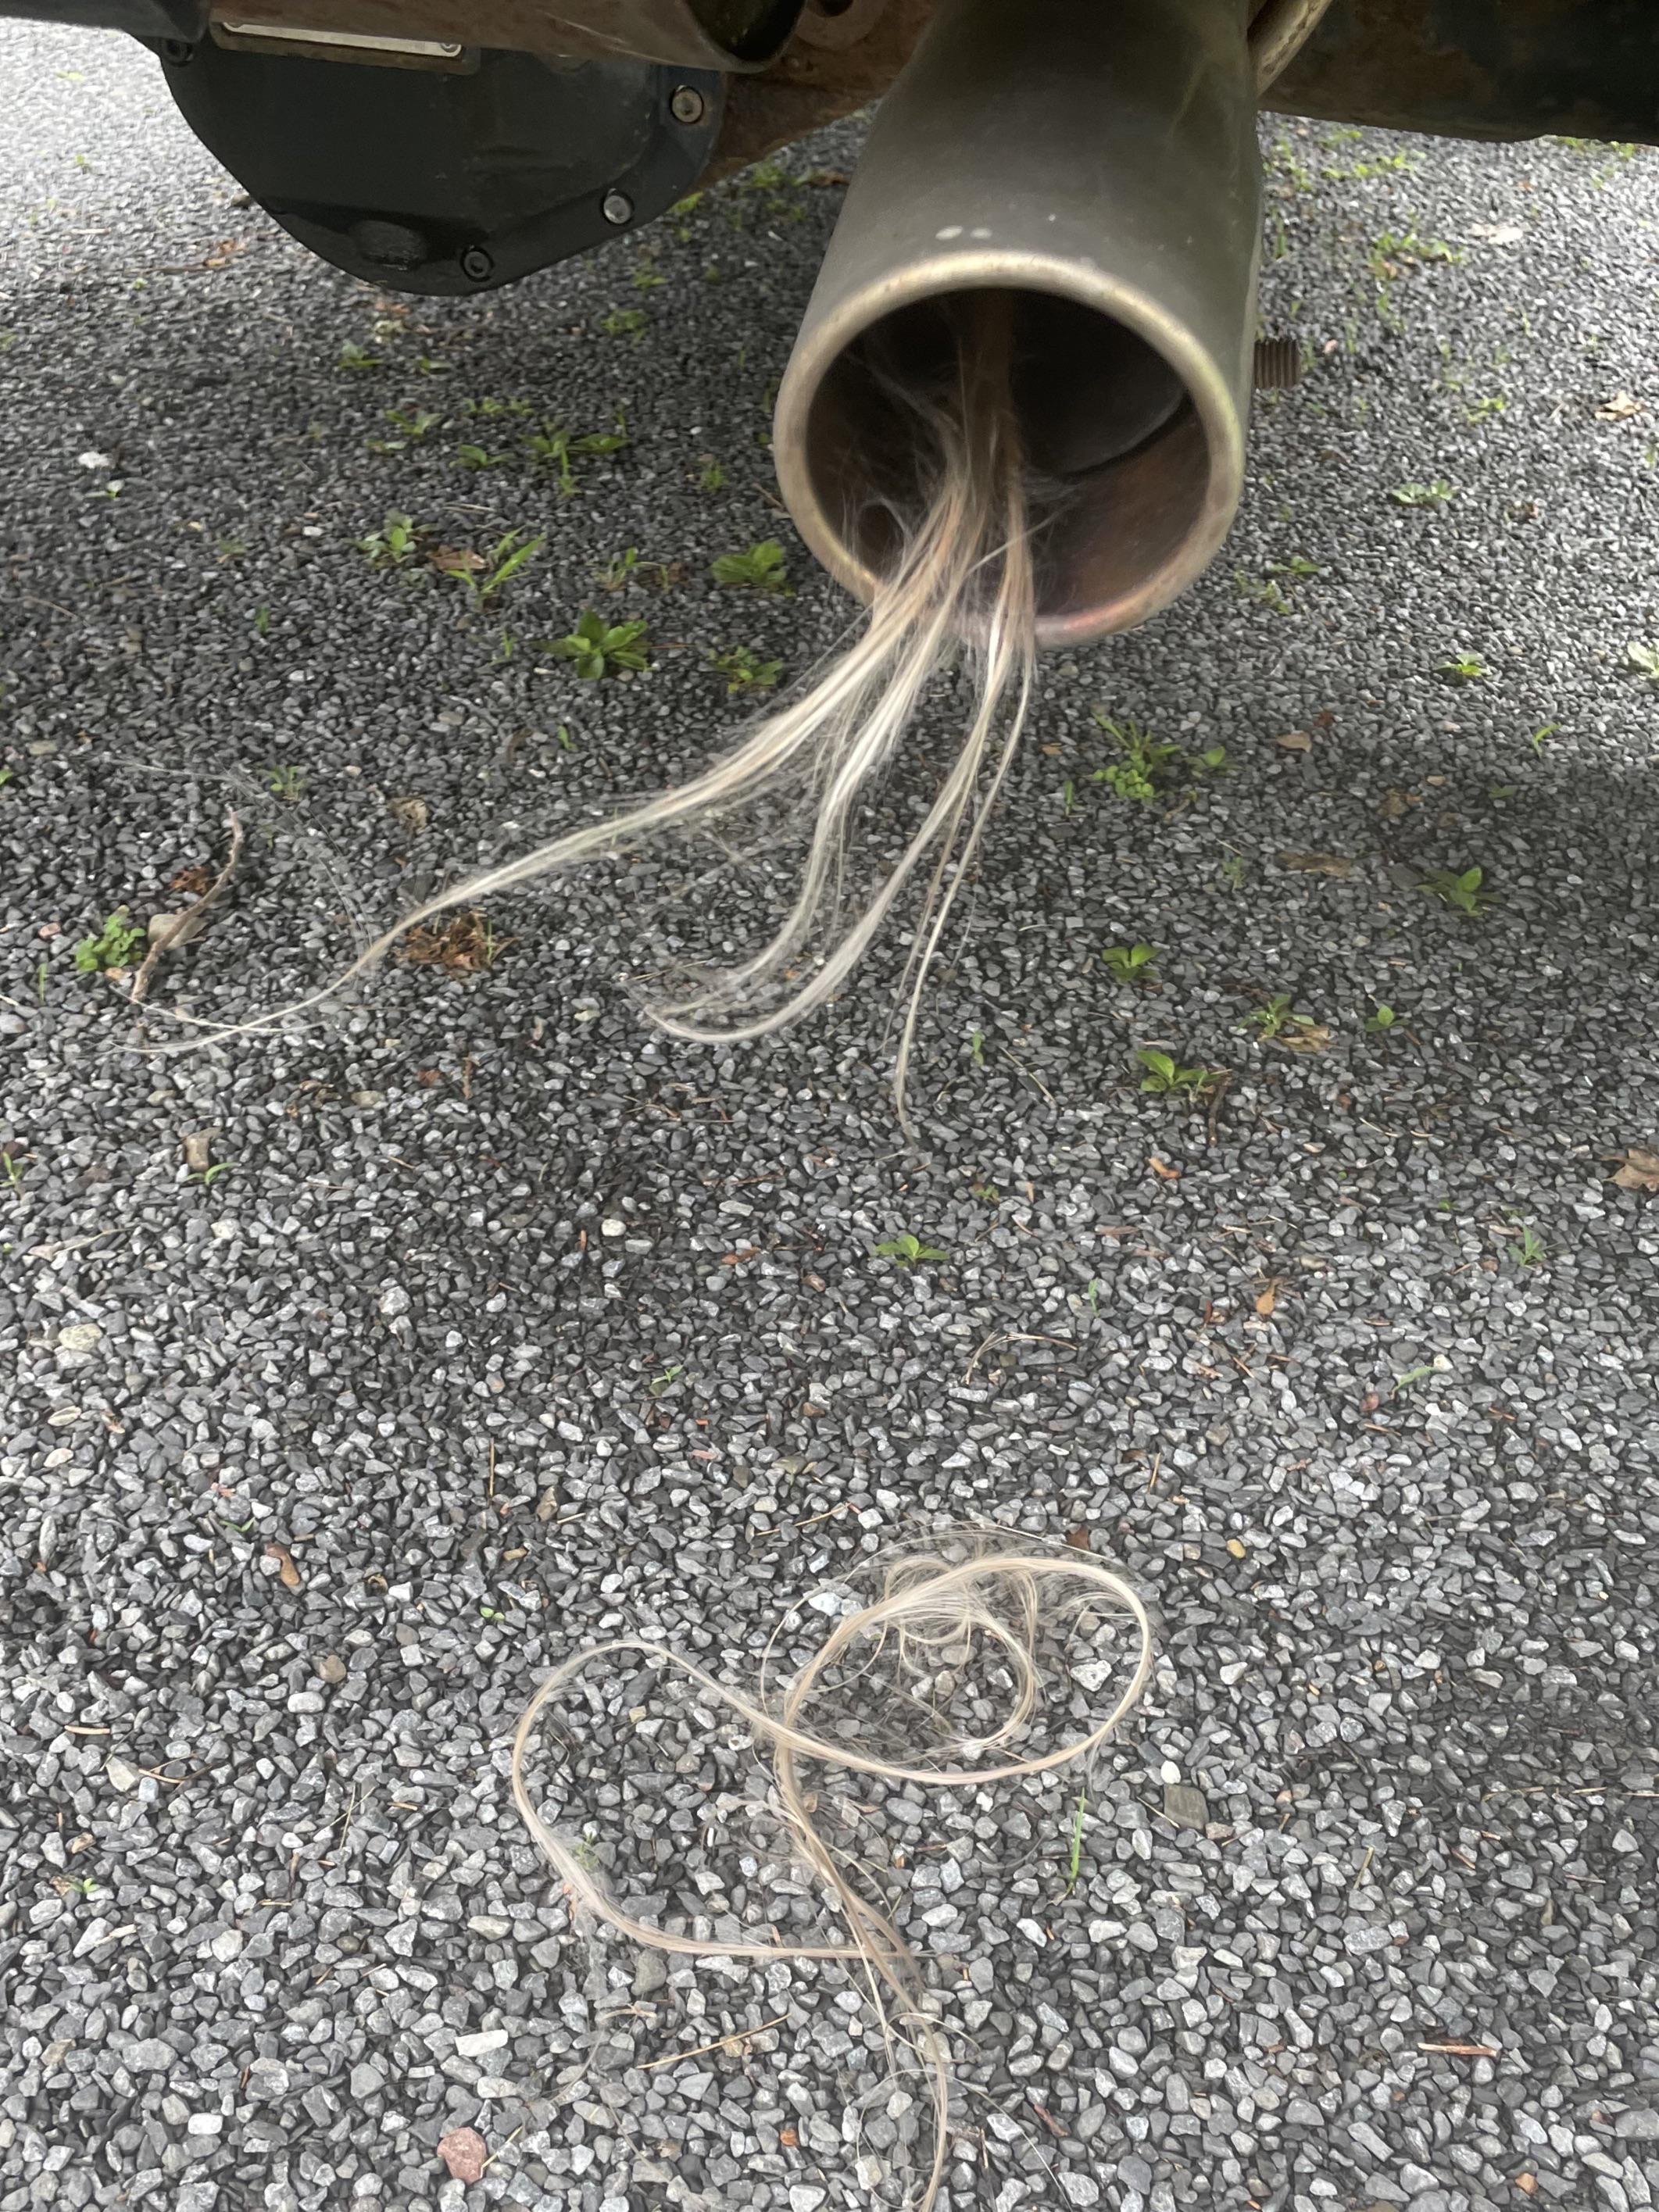 hair-like threads coming out of a muffler